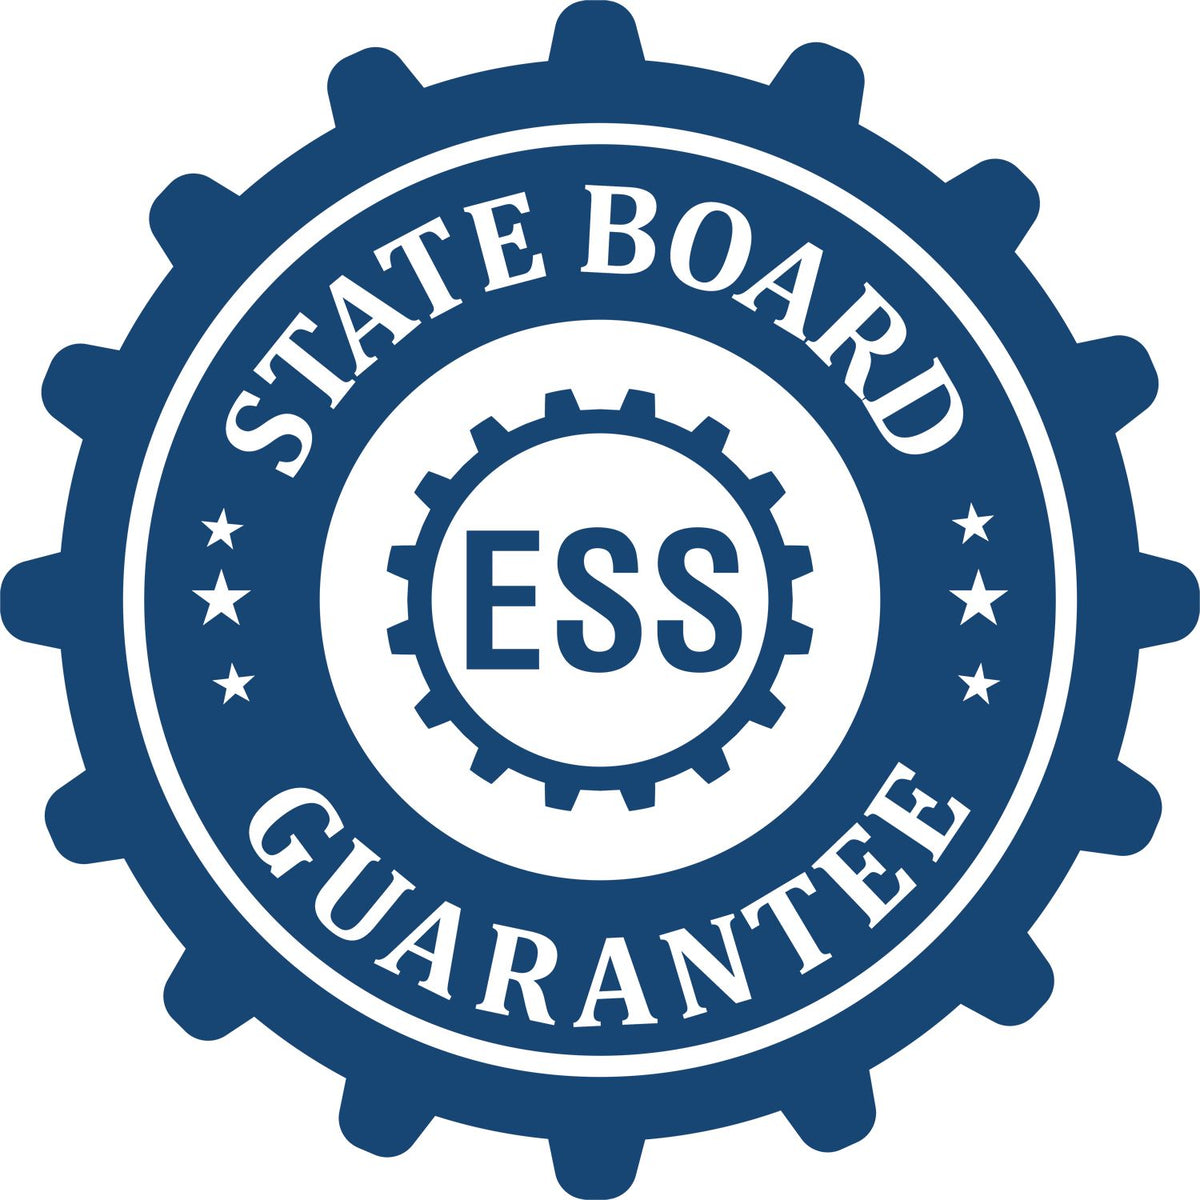 An emblem in a gear shape illustrating a state board guarantee for the Colorado Professional Engineer Seal Stamp product.